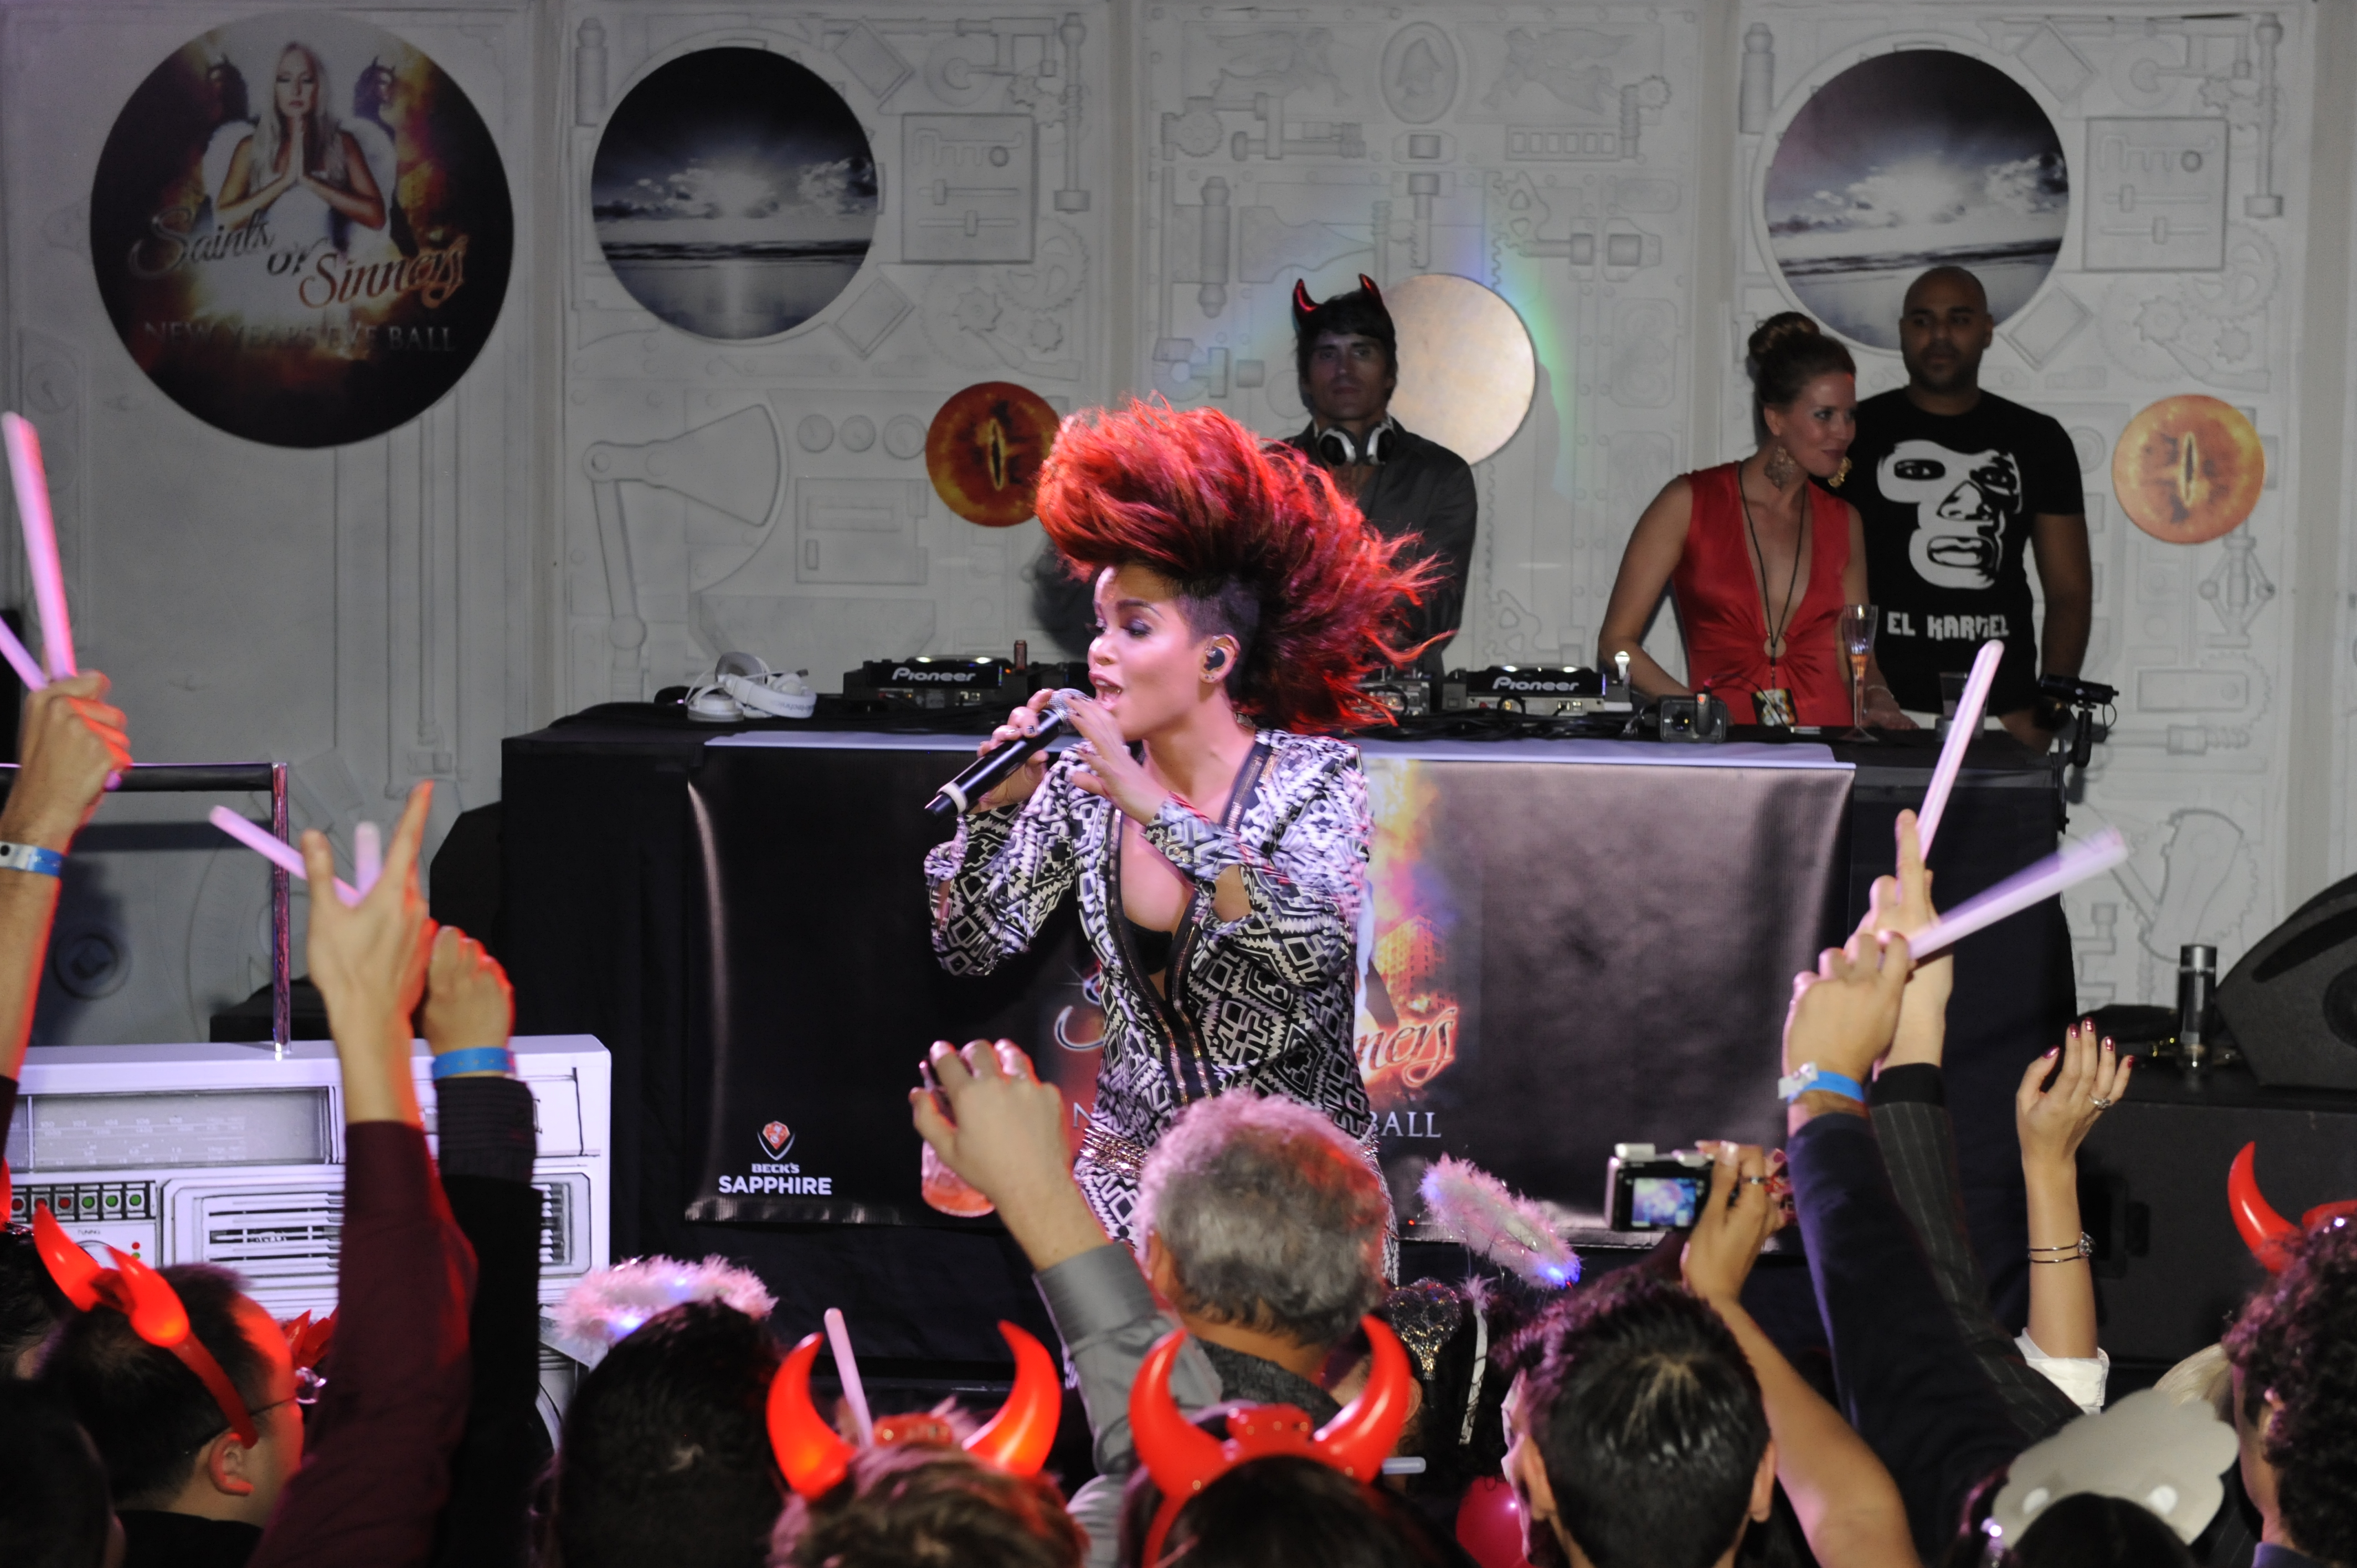 Eva Simons performs at the New Year's Eve launch party for Beck's Sapphire at the Roosevelt Hotel in Los Angeles